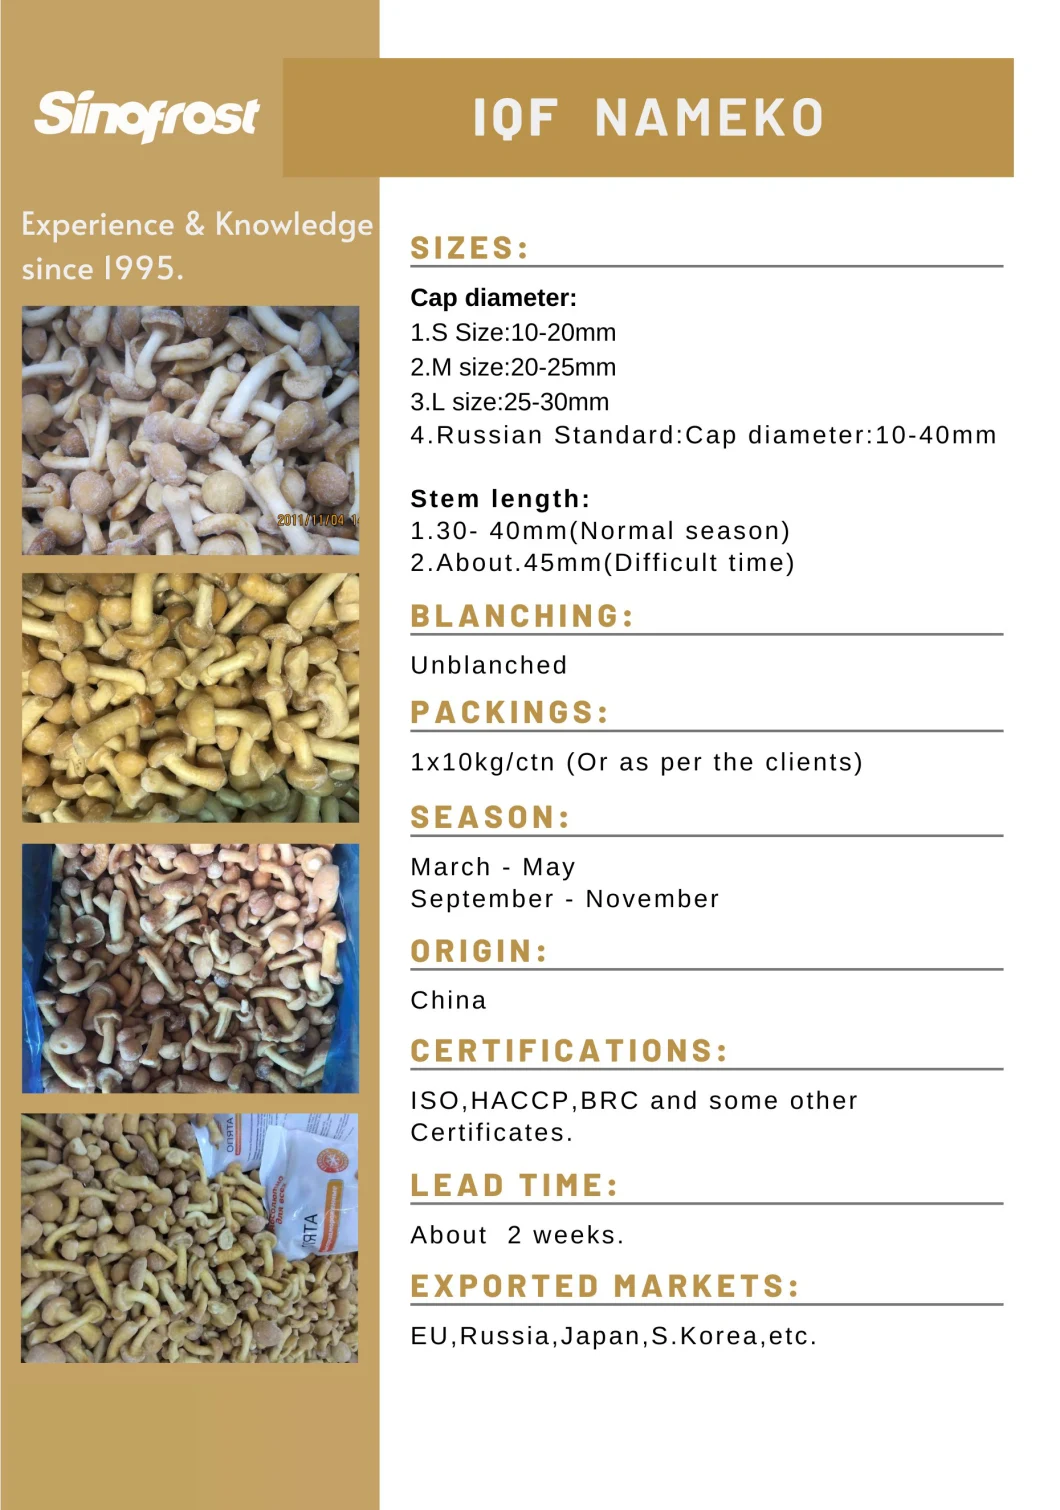 Frozen Lotus Roots Slices, IQF Lotus Root Cuts,Frozen Shiitake Cuts,Frozen Shiitake Mushrooms Slices, IQF Shiitake Wholes,IQF Water Chestnut Dices,IQF Mushrooms